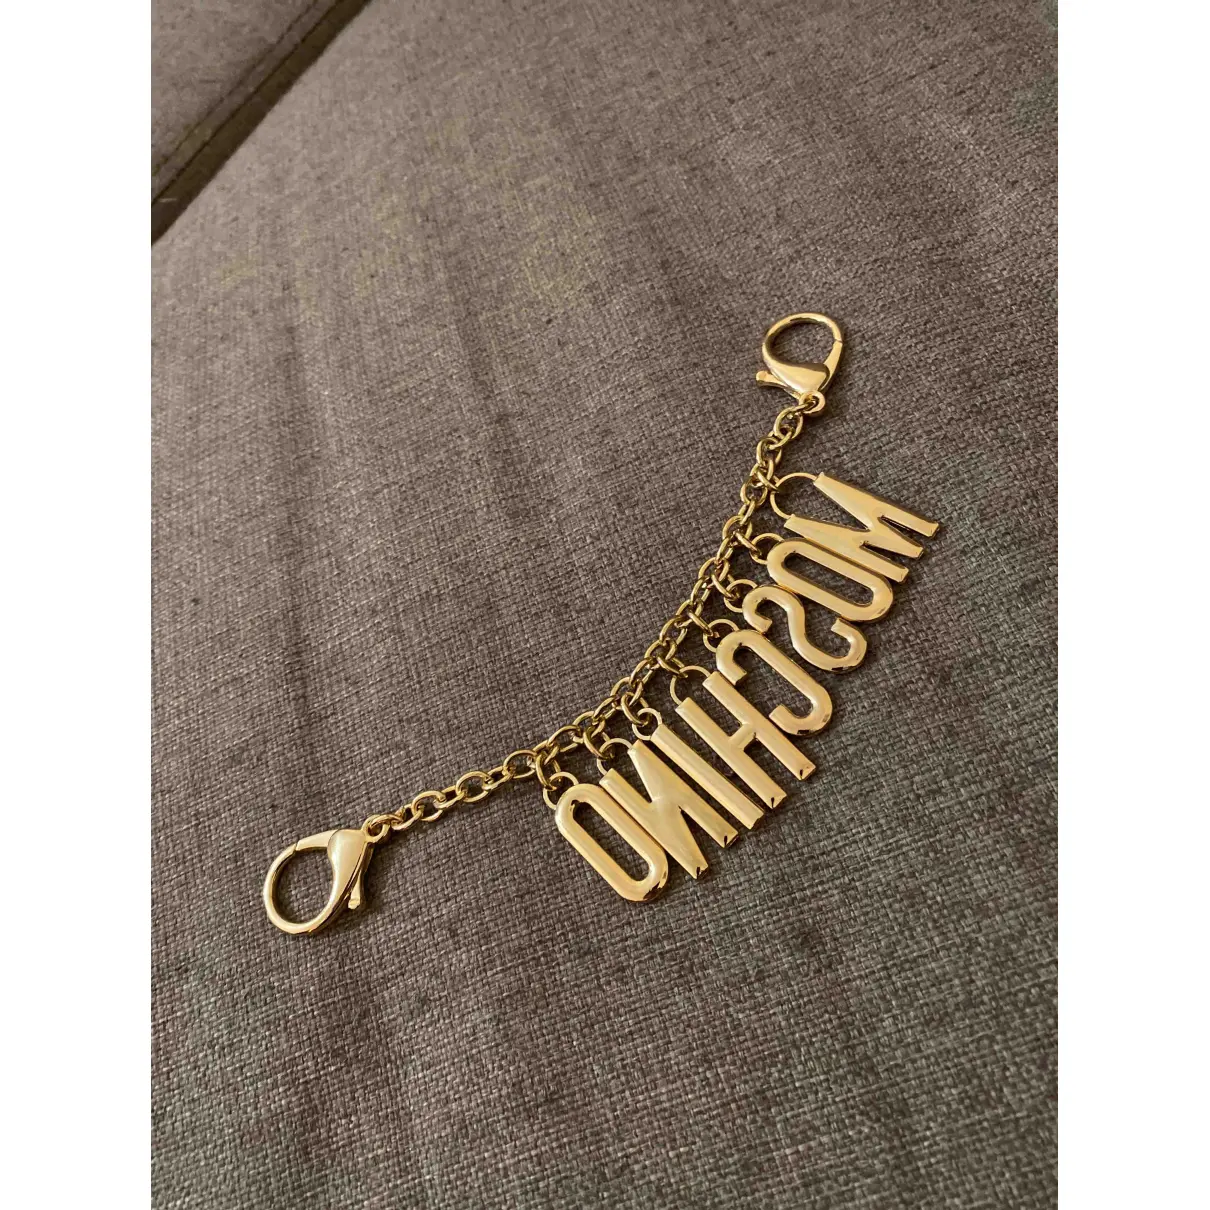 Luxury Moschino Cheap And Chic Bag charms Women